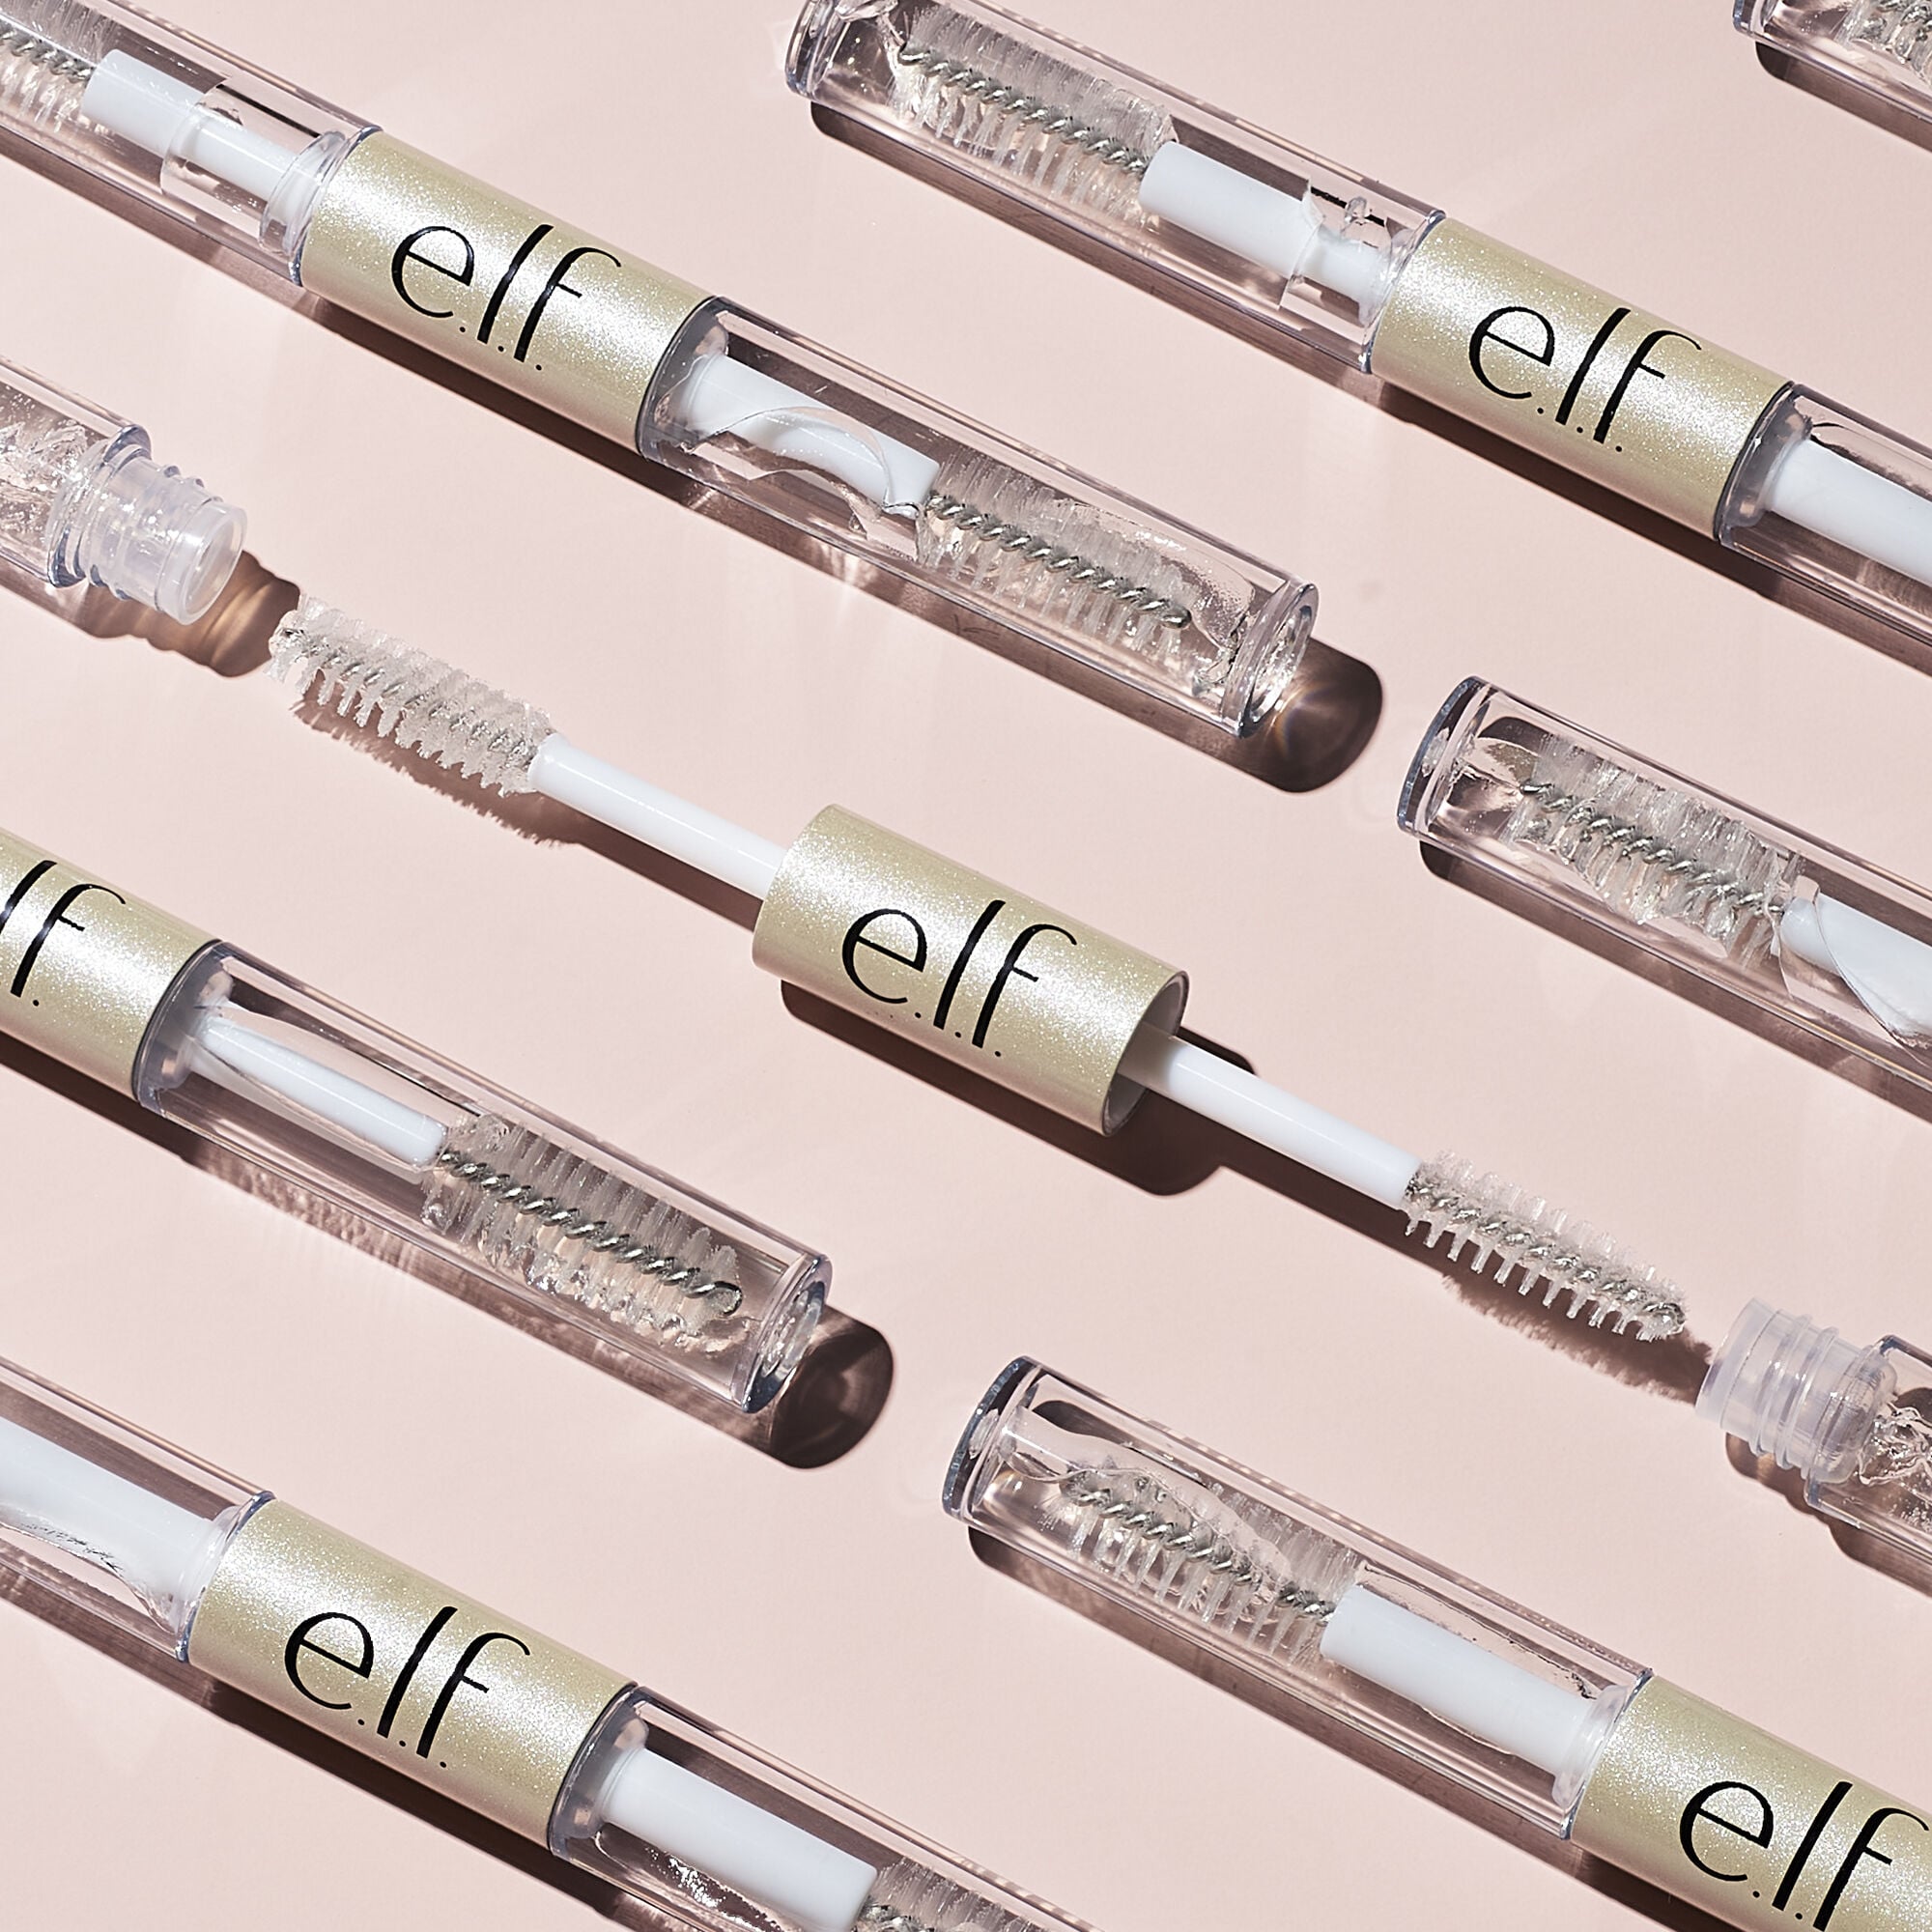 Clear Brow & Lash Mascara | Our Beauty Editors Reveal the e.l.f. Cosmetics Products That Kept Them Coming Back For 16 Years | Beauty Photo 4